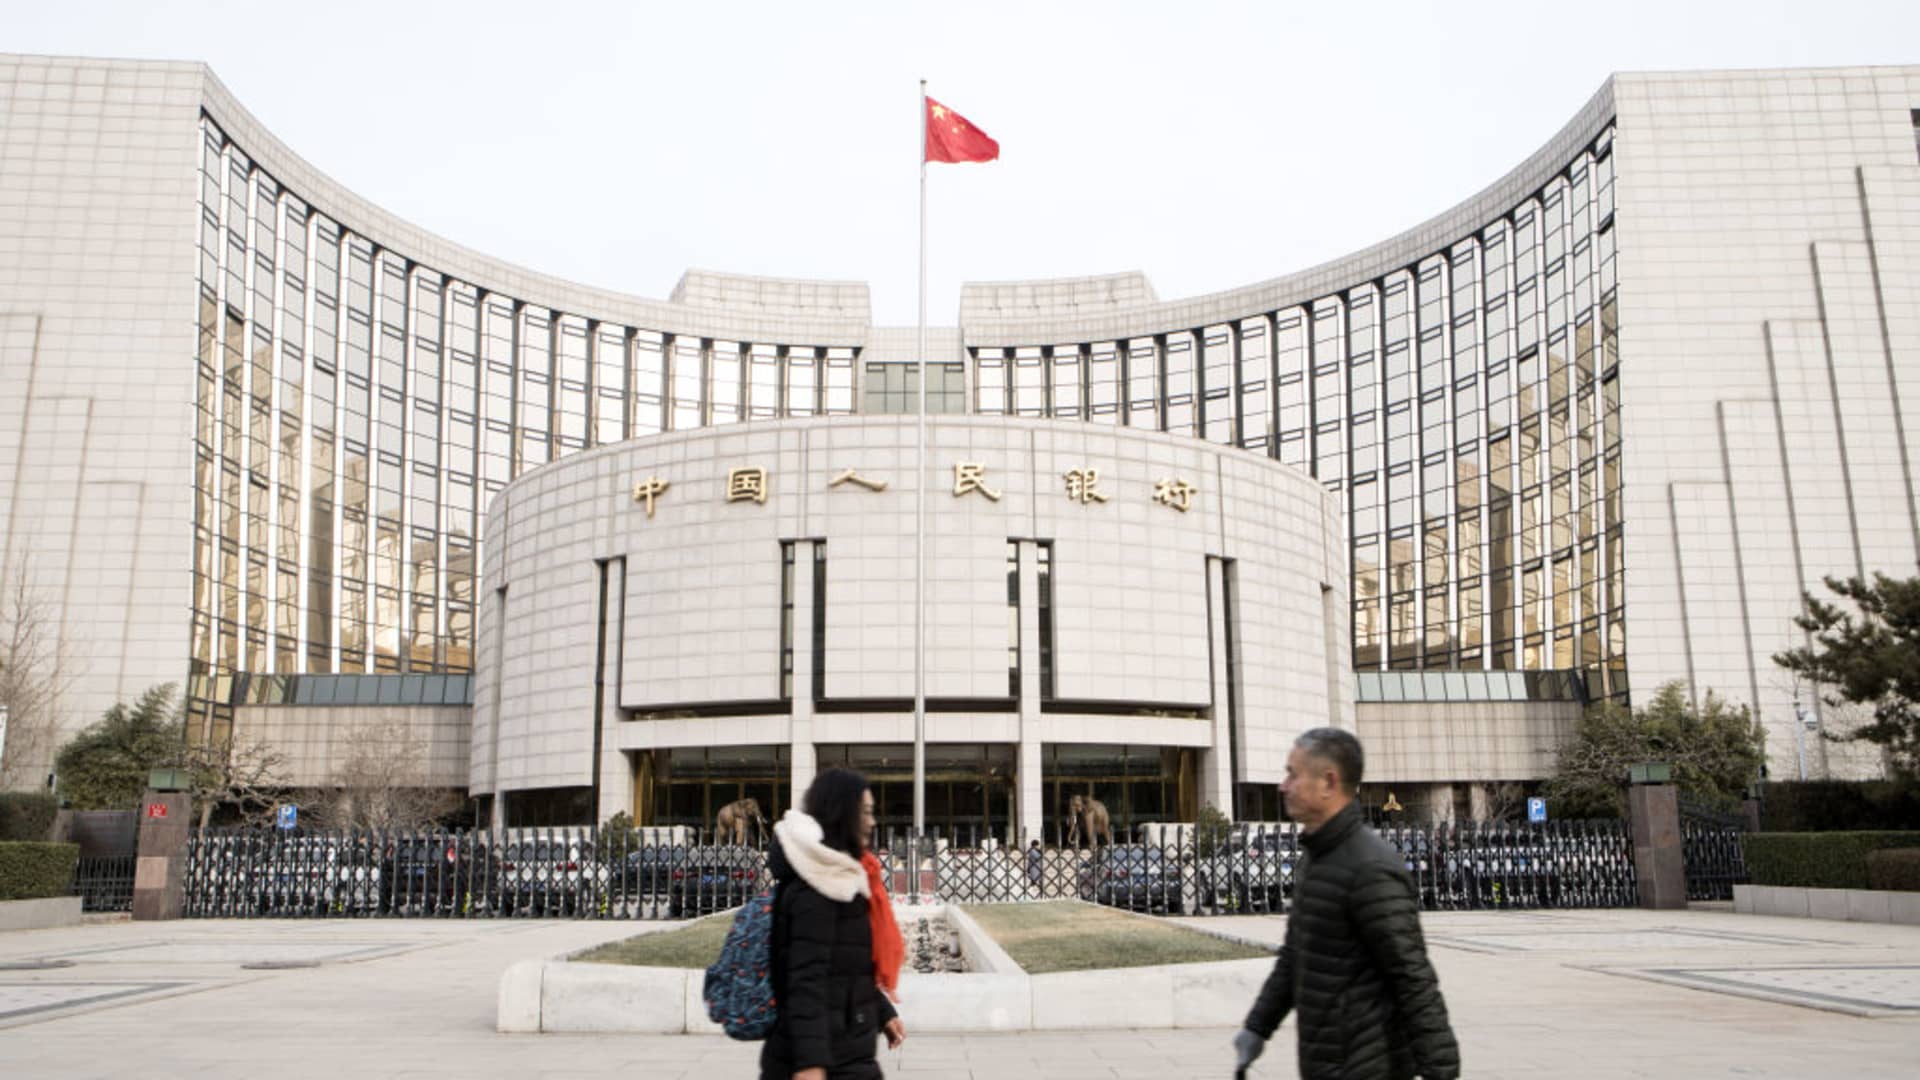 China economy: PBOC cuts loan prime rates (LPR) for 1-year, 5-year